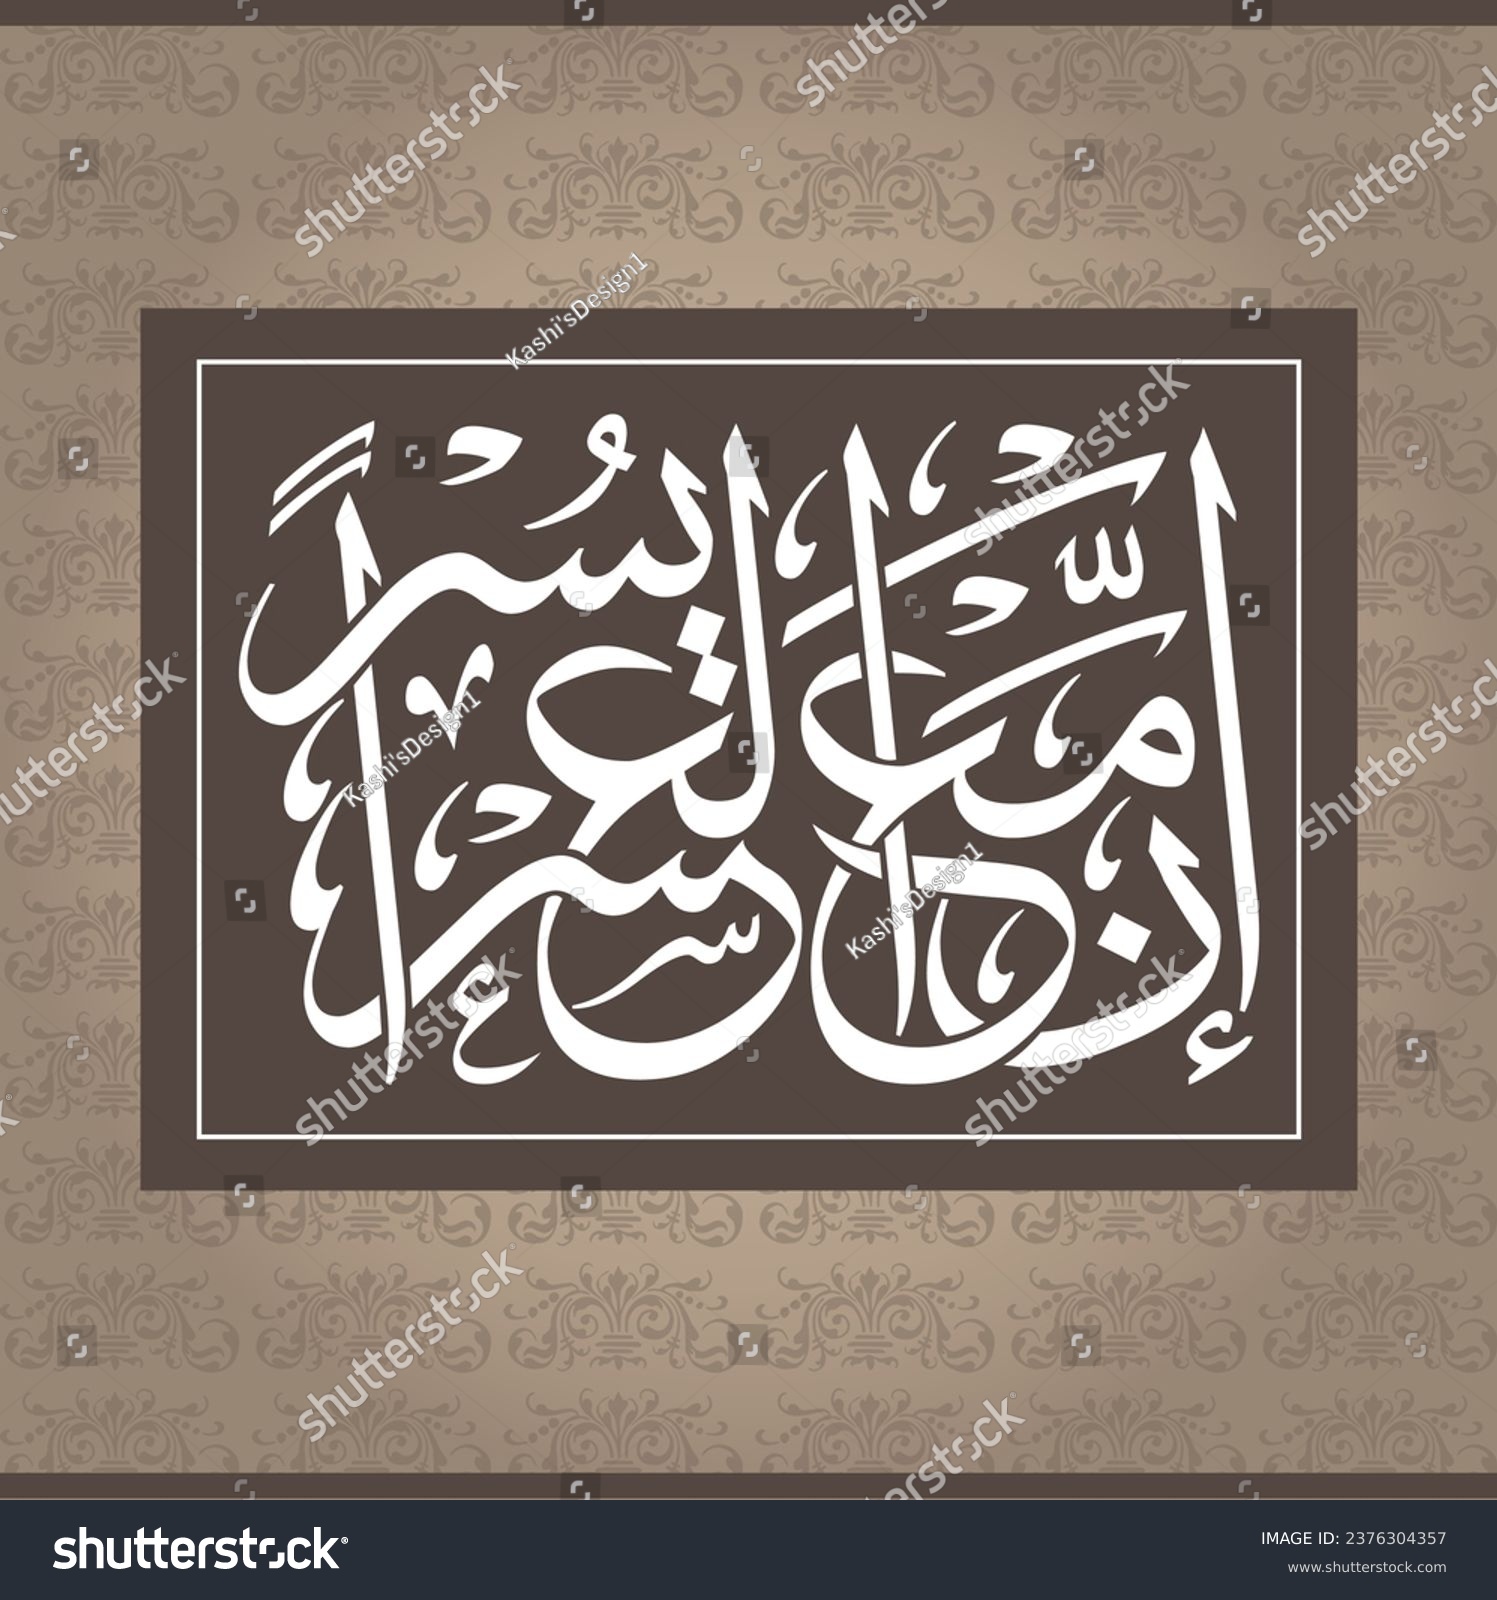 SVG of Arabic Ayat Calligraphy, Inna ma-al usri yusra Means Surely, with difficulty comes ease by Kashi'sDesign1 svg